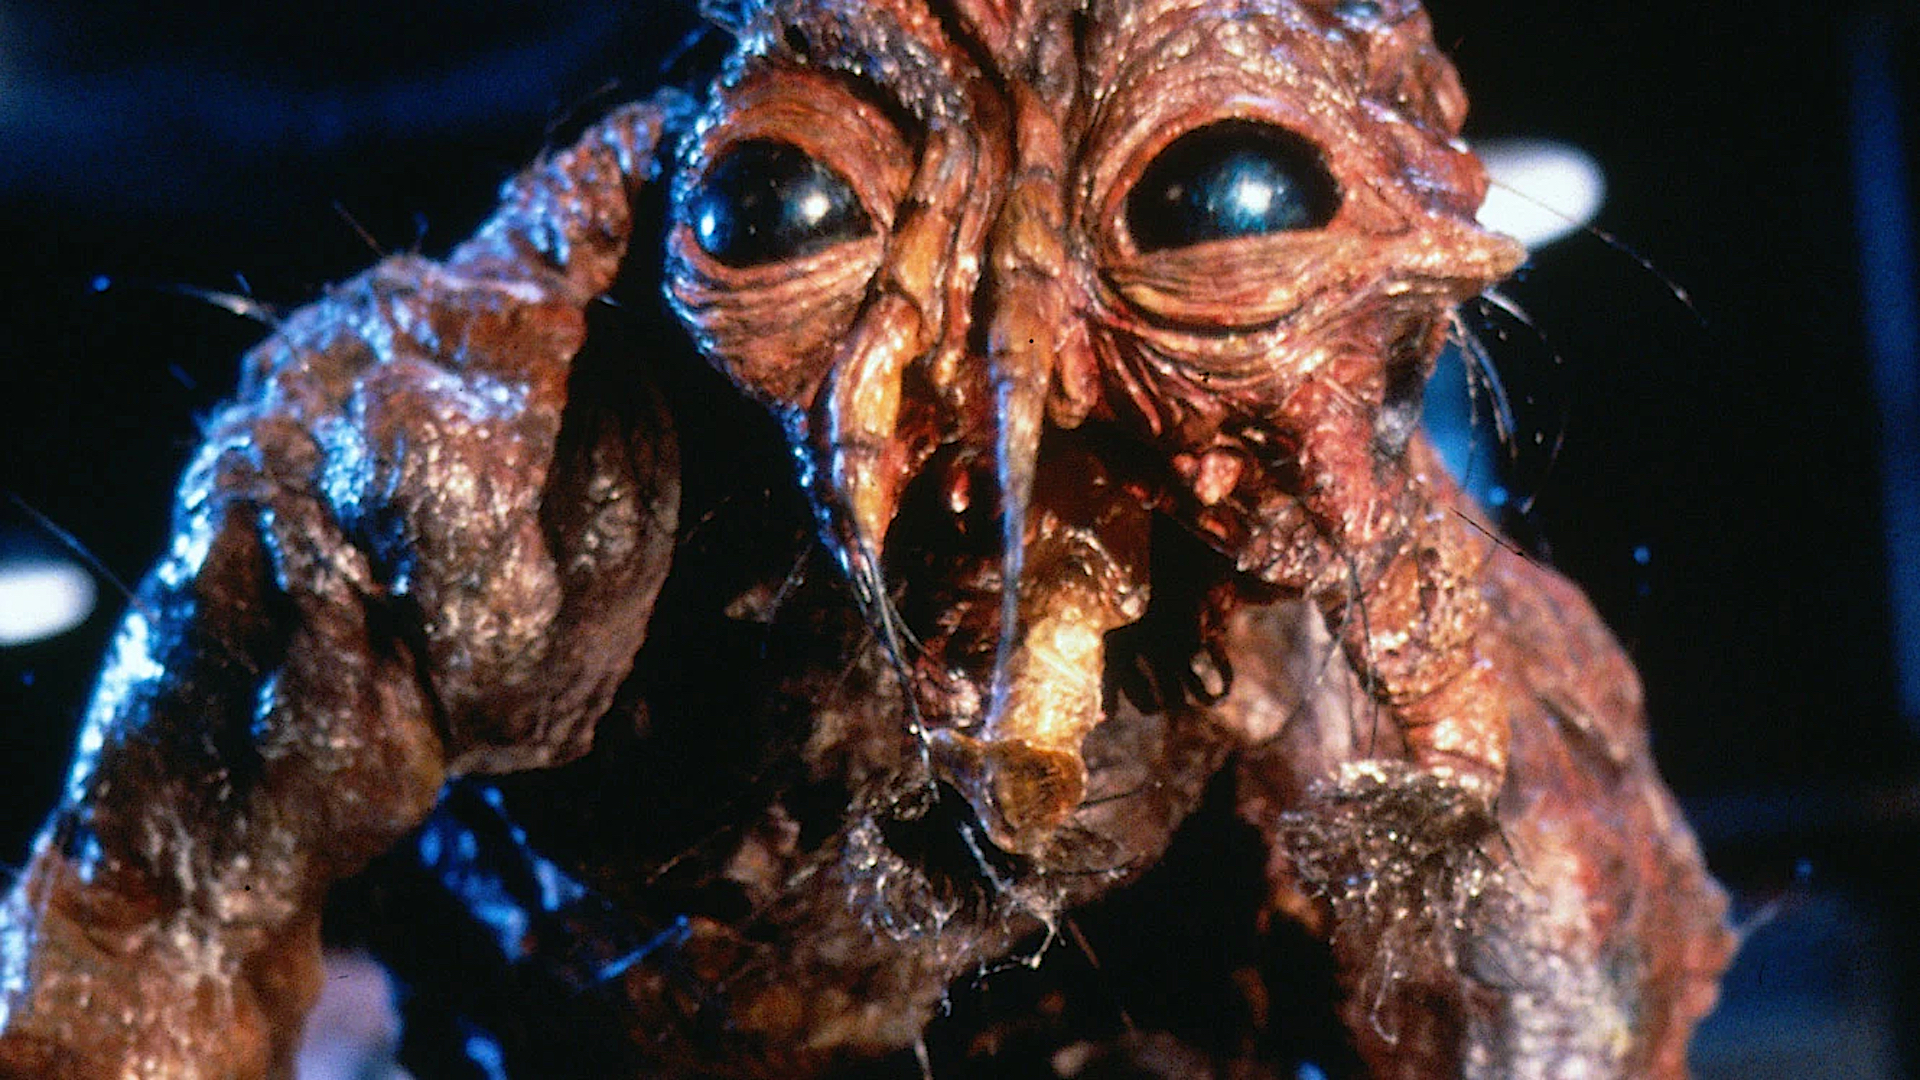 The Brundlefly in "The Fly" (1986).